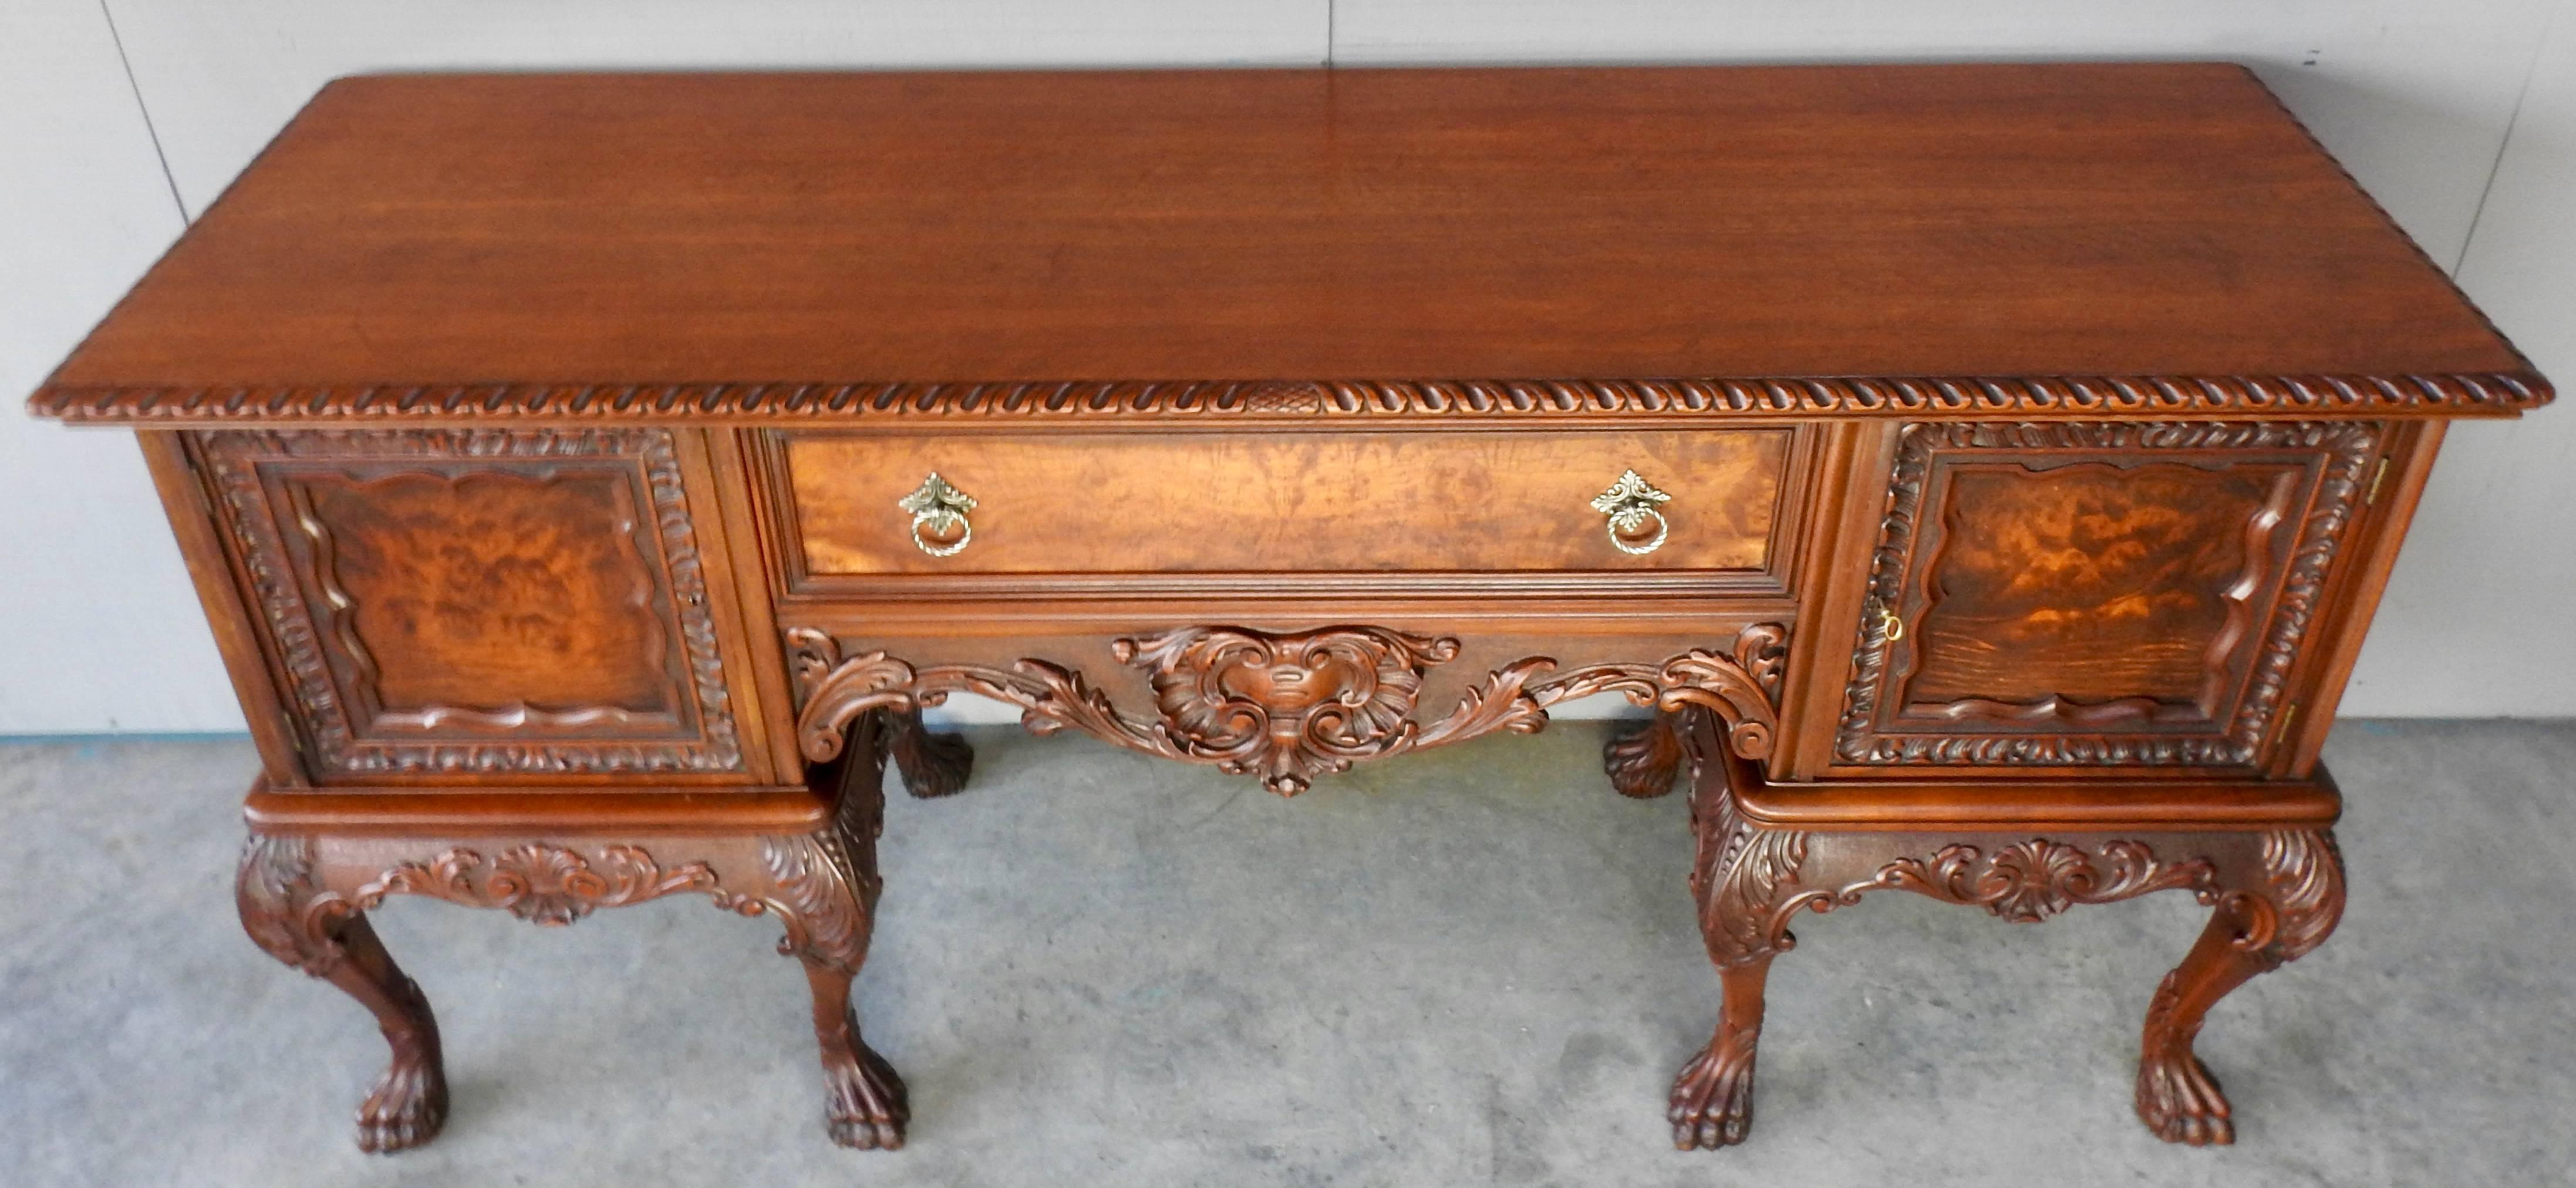 Elaborate Victorian walnut sideboard with richly carved details and rich burl wood. Hairy paw feet extend to graceful curved legs. The dove tailed center drawer has bronze pulls. The side doors open for ample storage. Remains of the tag from a Grand